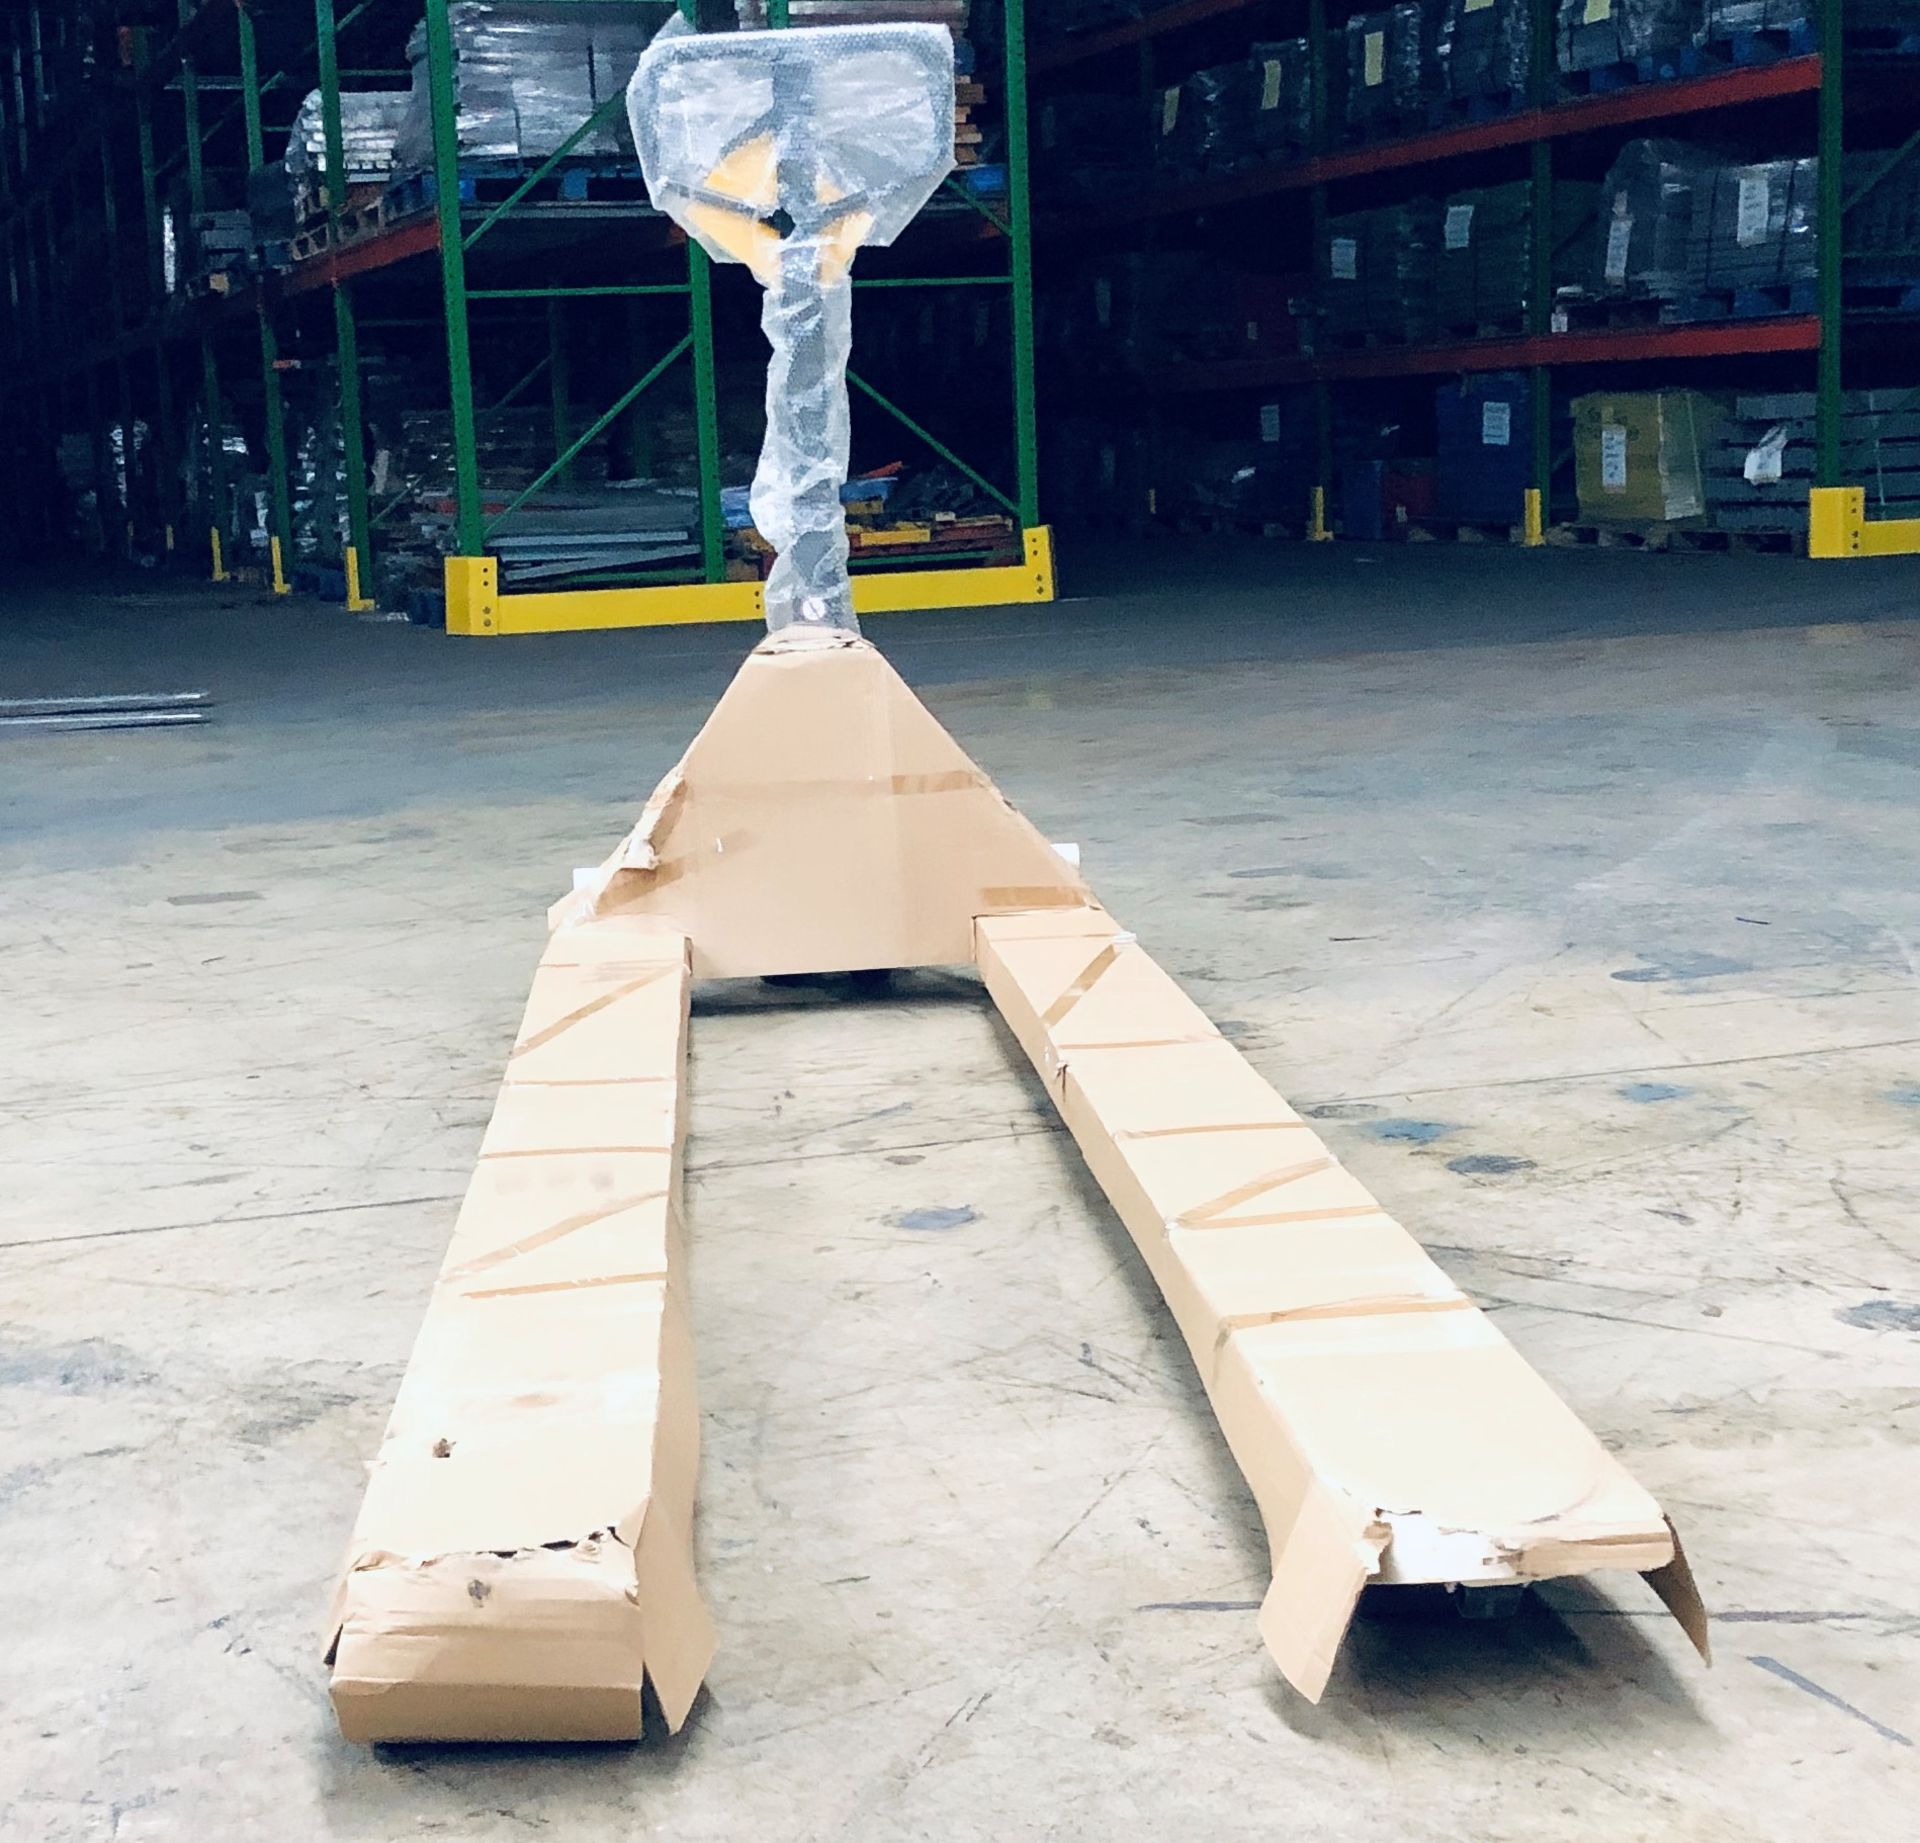 27"W X 96"L BRAND NEW LONG PALLET JACK - Image 3 of 4